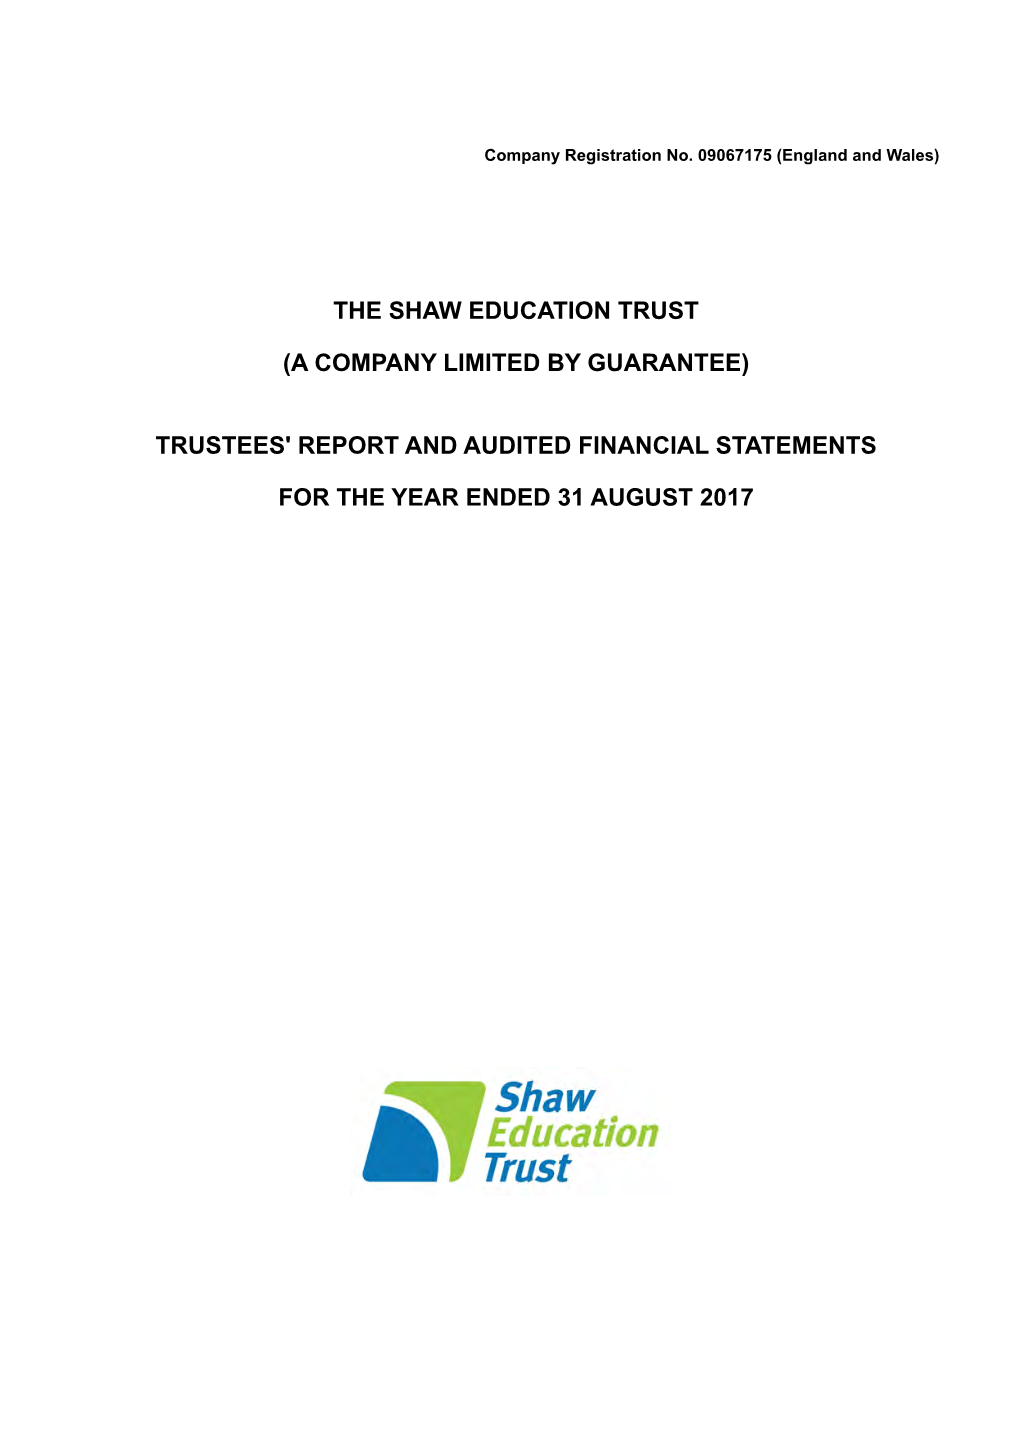 Trustees' Report and Audited Financial Statements For